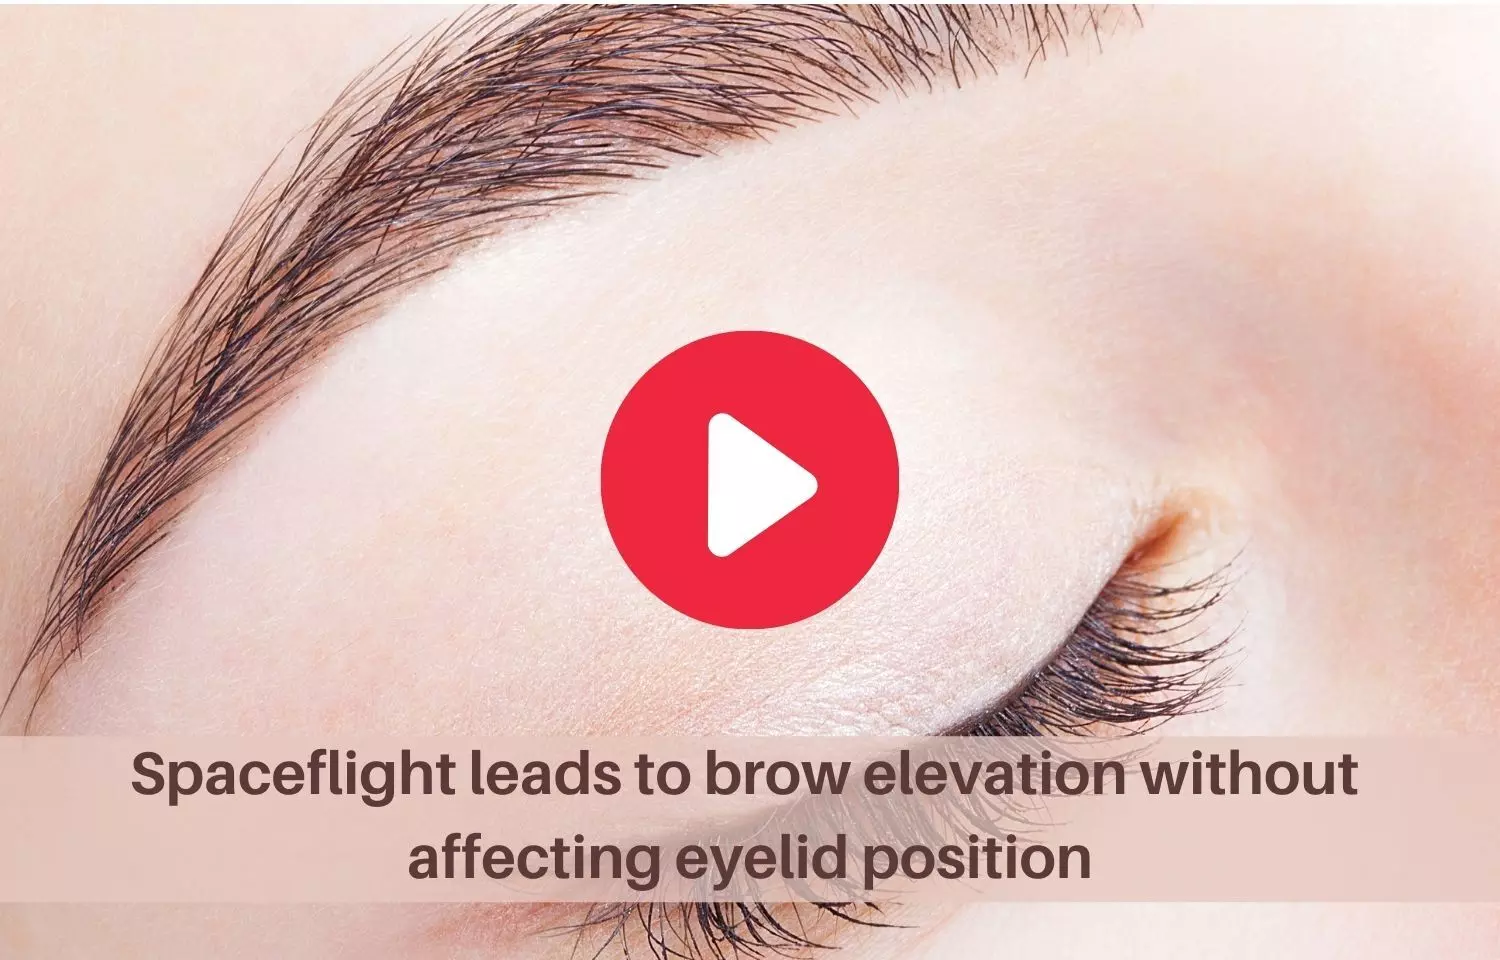 Spaceflight can cause brow elevation without eyelid position change